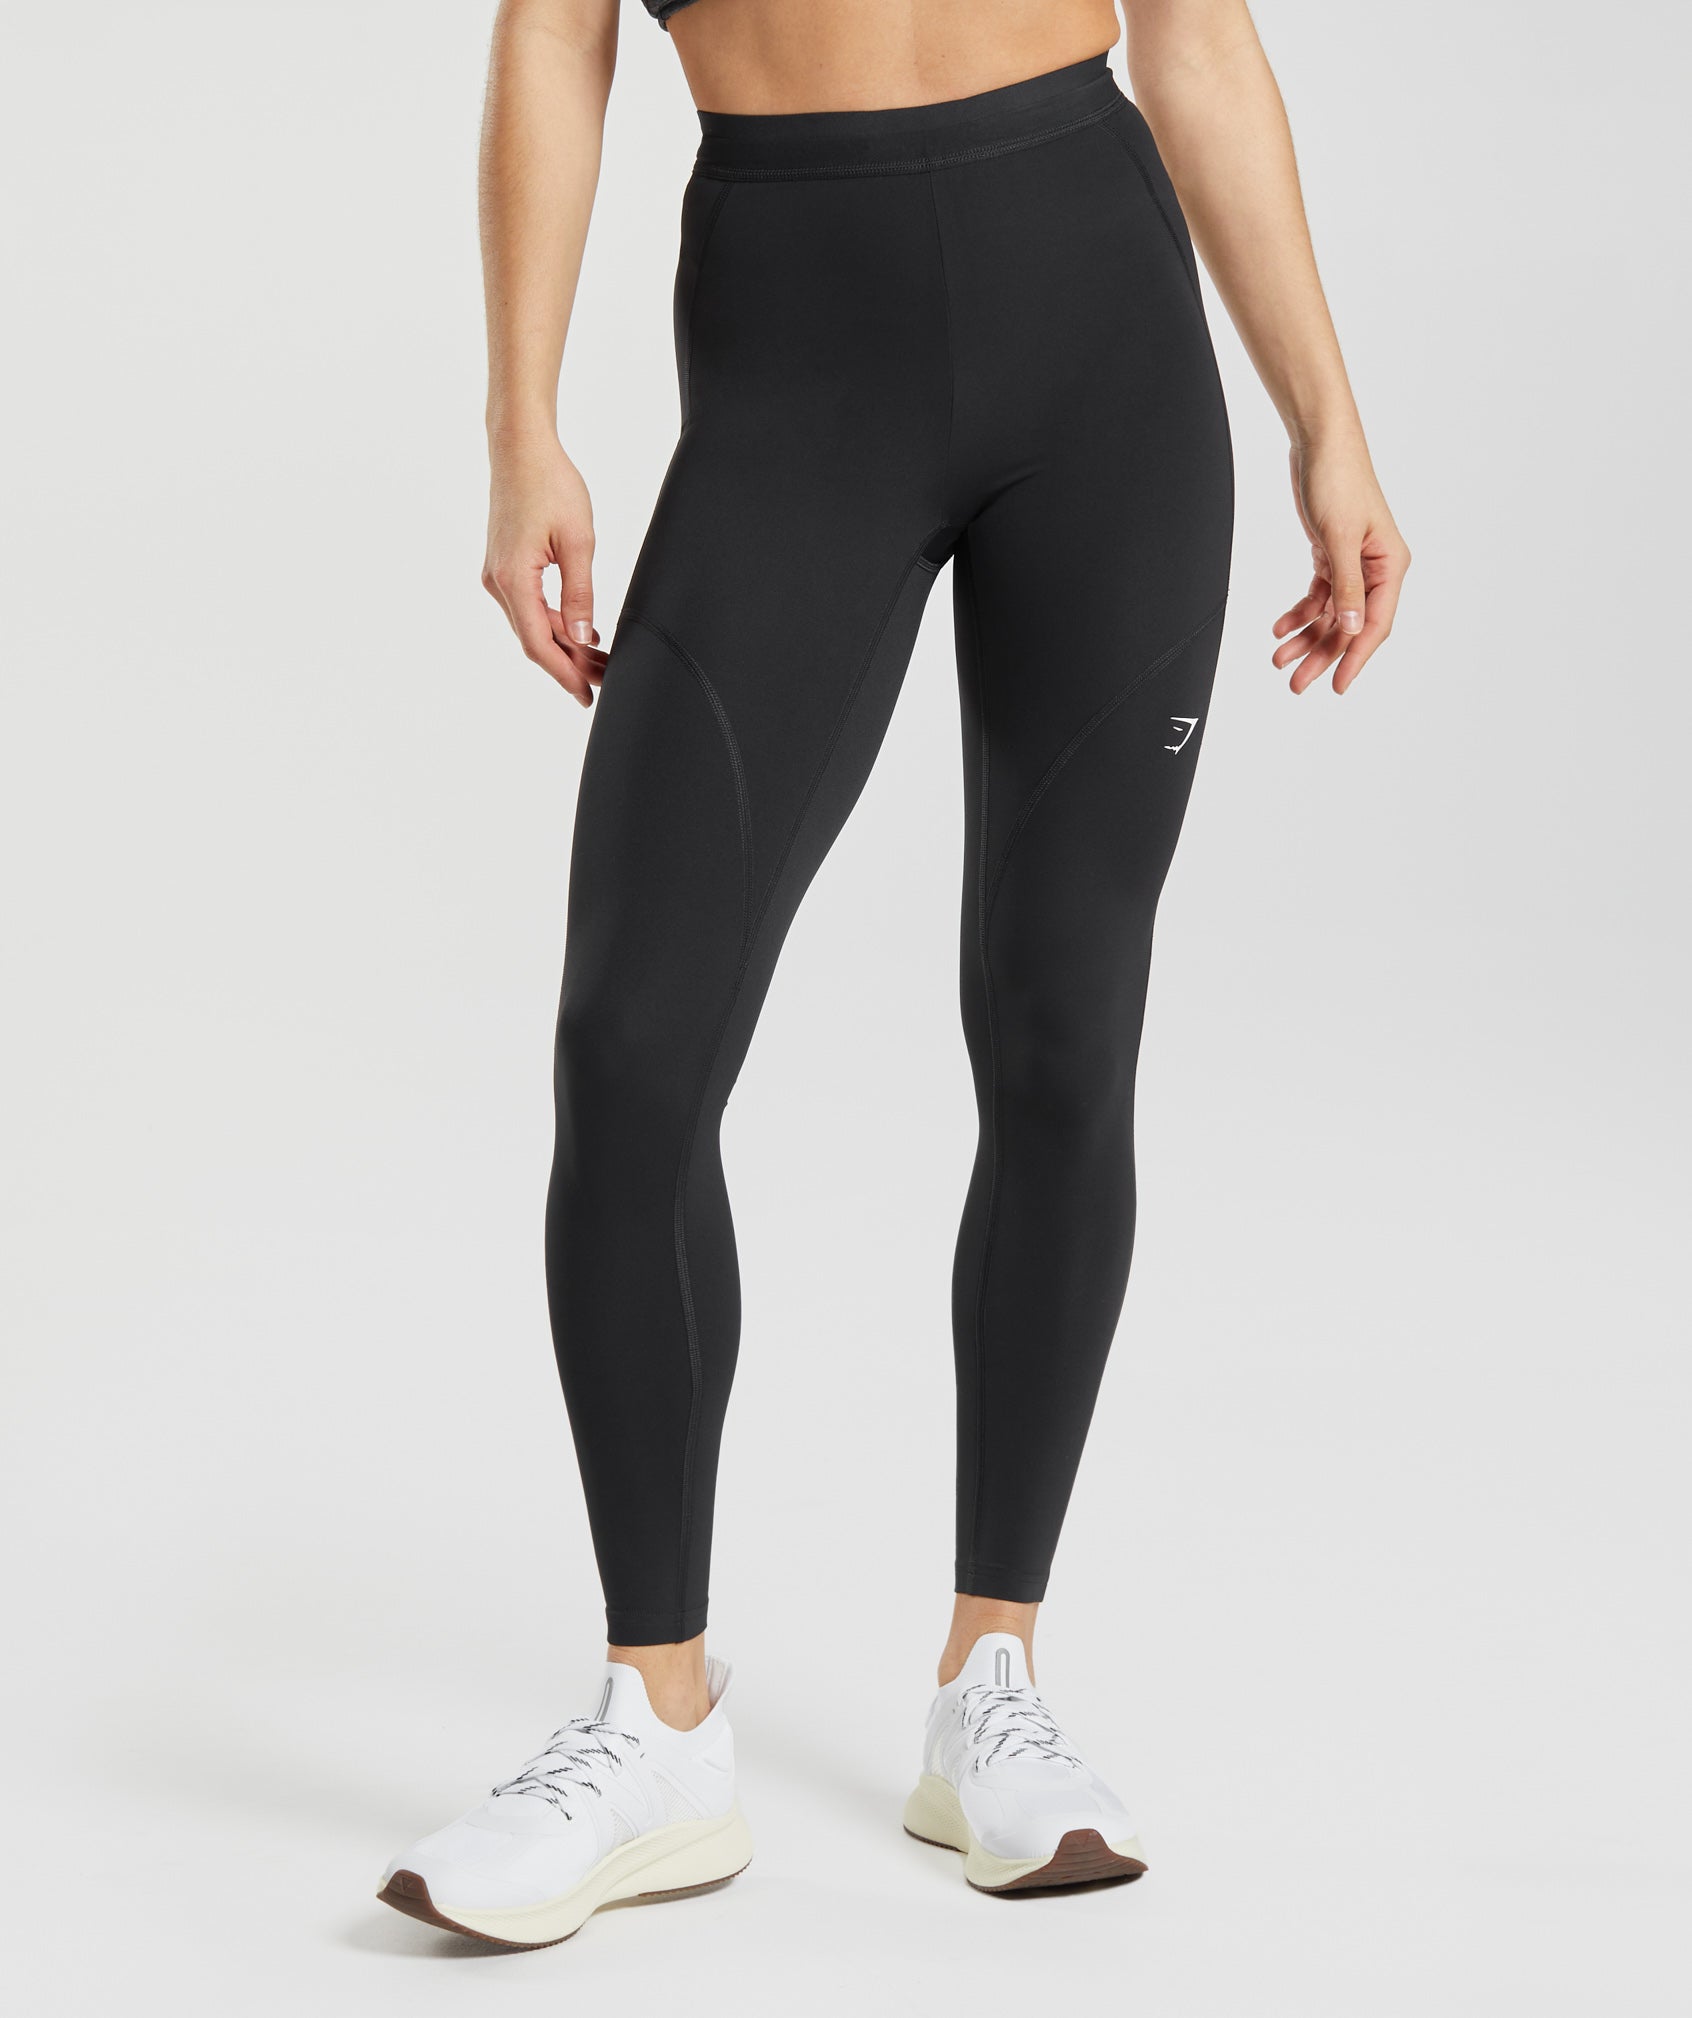  Womens Yoga Pants with Pocket Fitness Sports Running